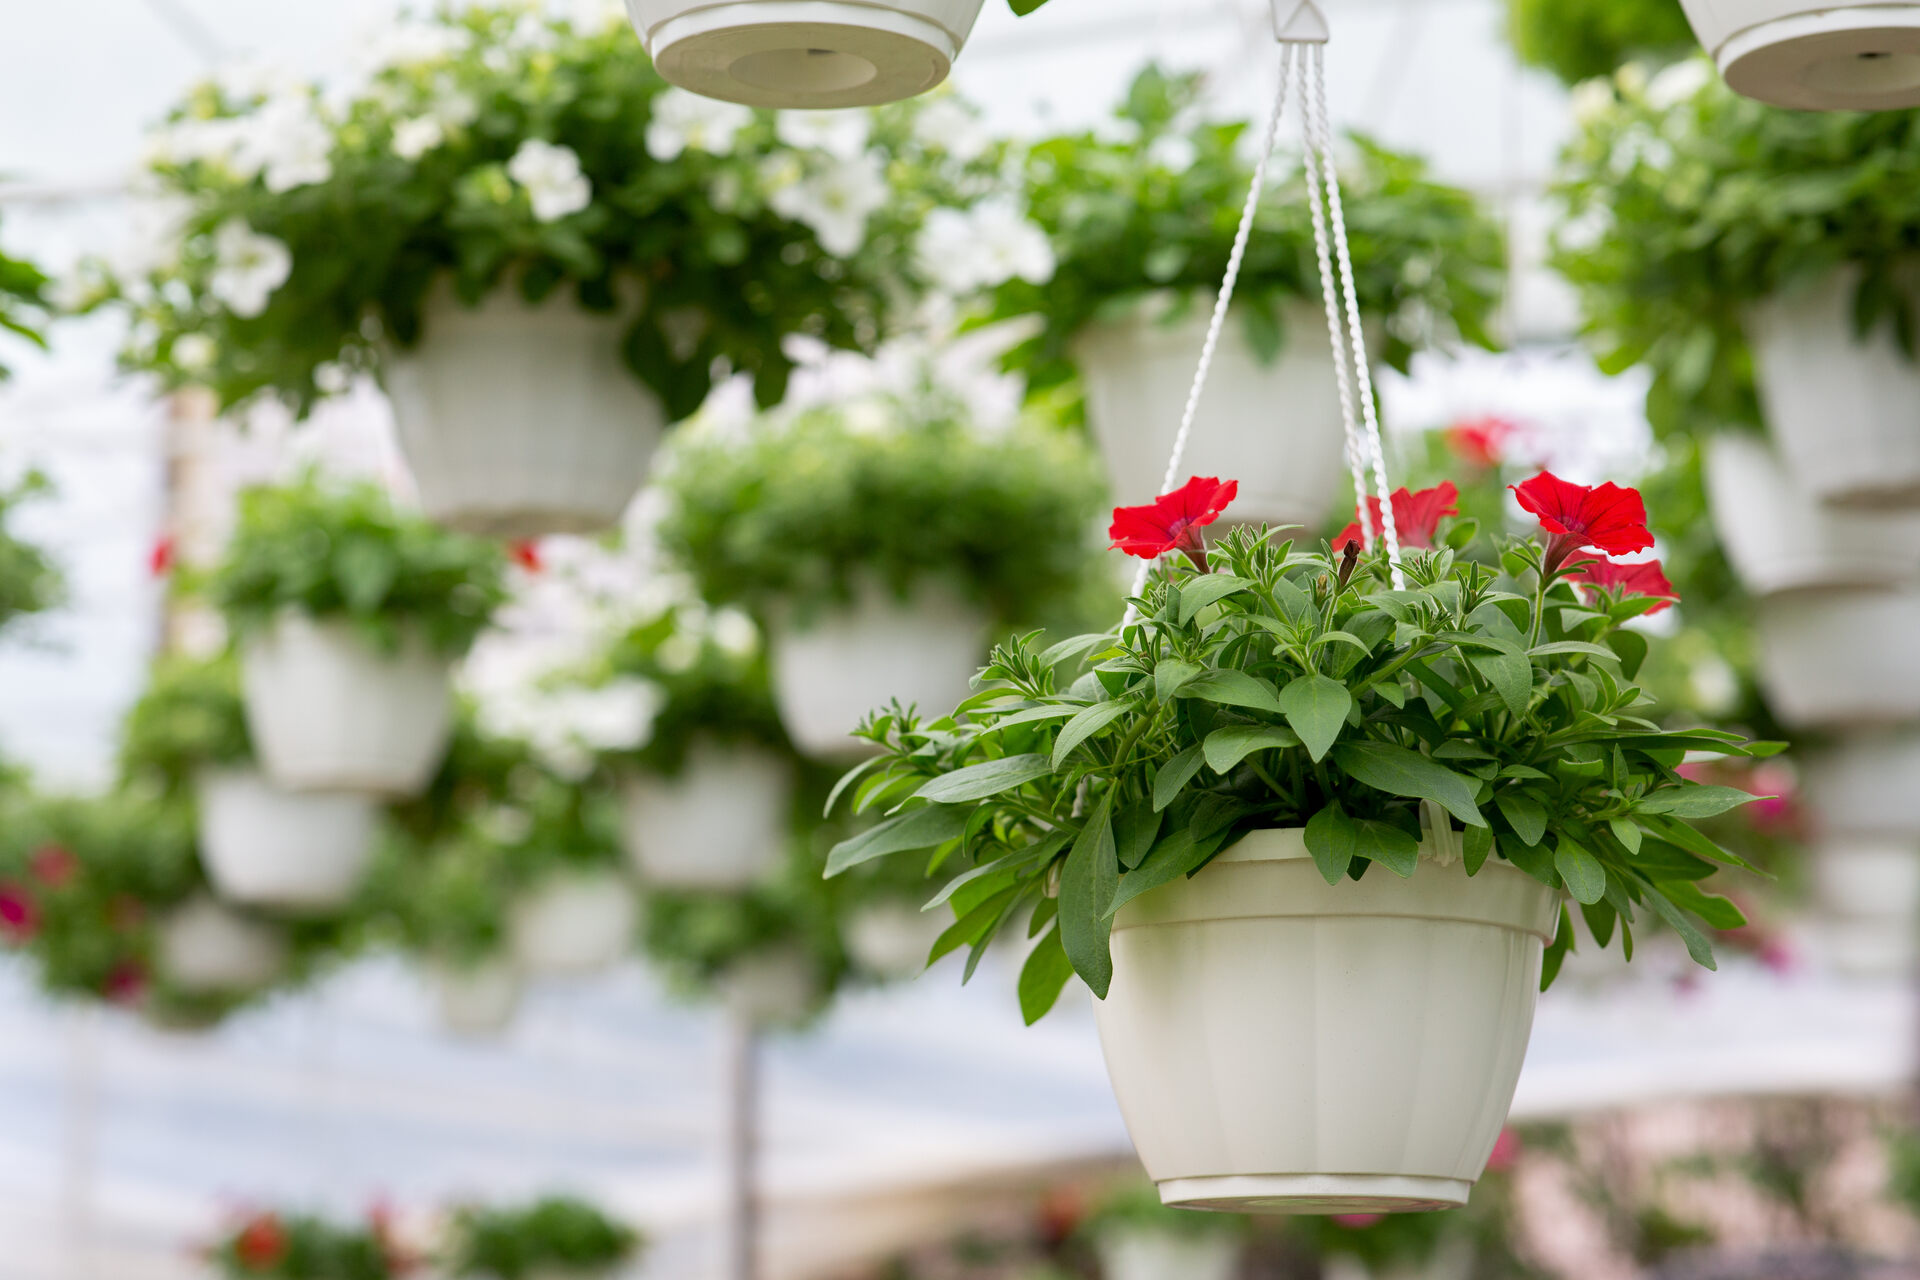 Potted plants hanging from the ceiling